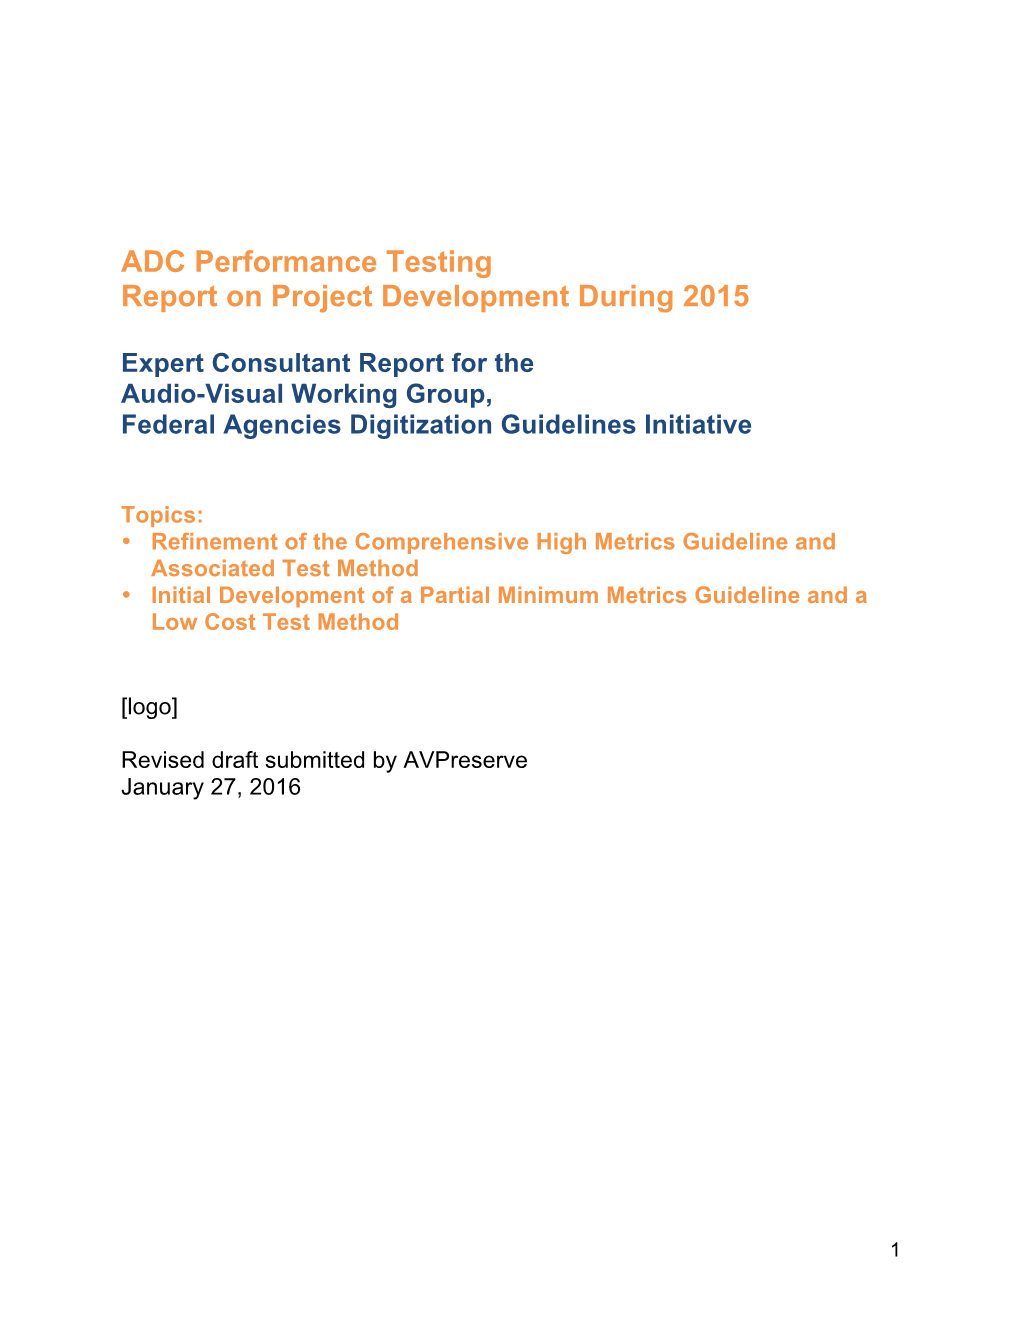 ADC Performance Testing: Report on Project Development During 2015